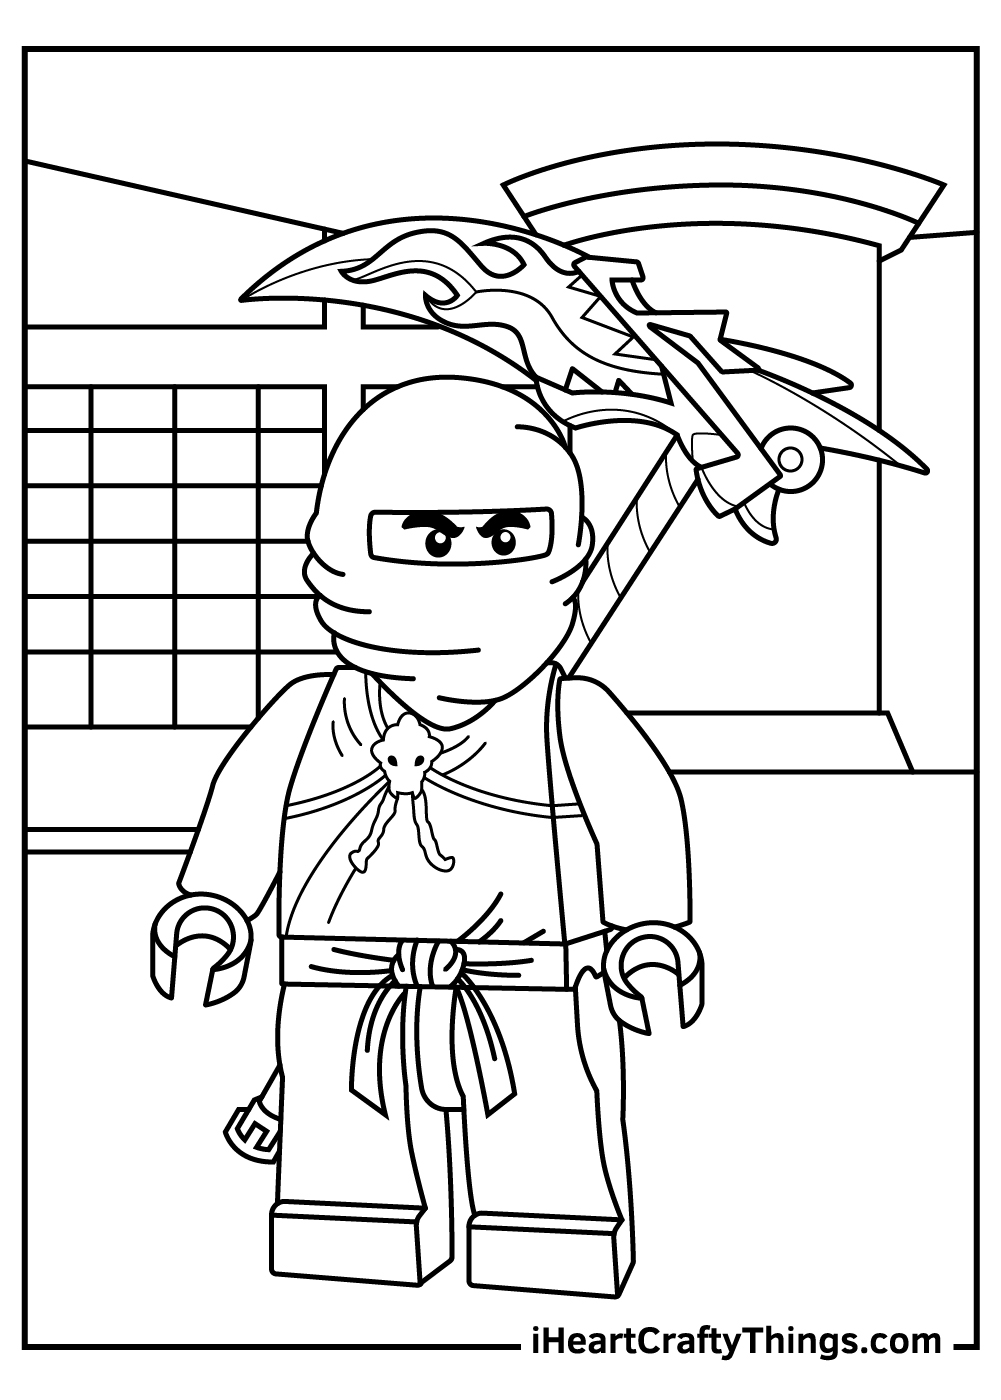 Printable Lego Ninjago Coloring Pages Updated 20